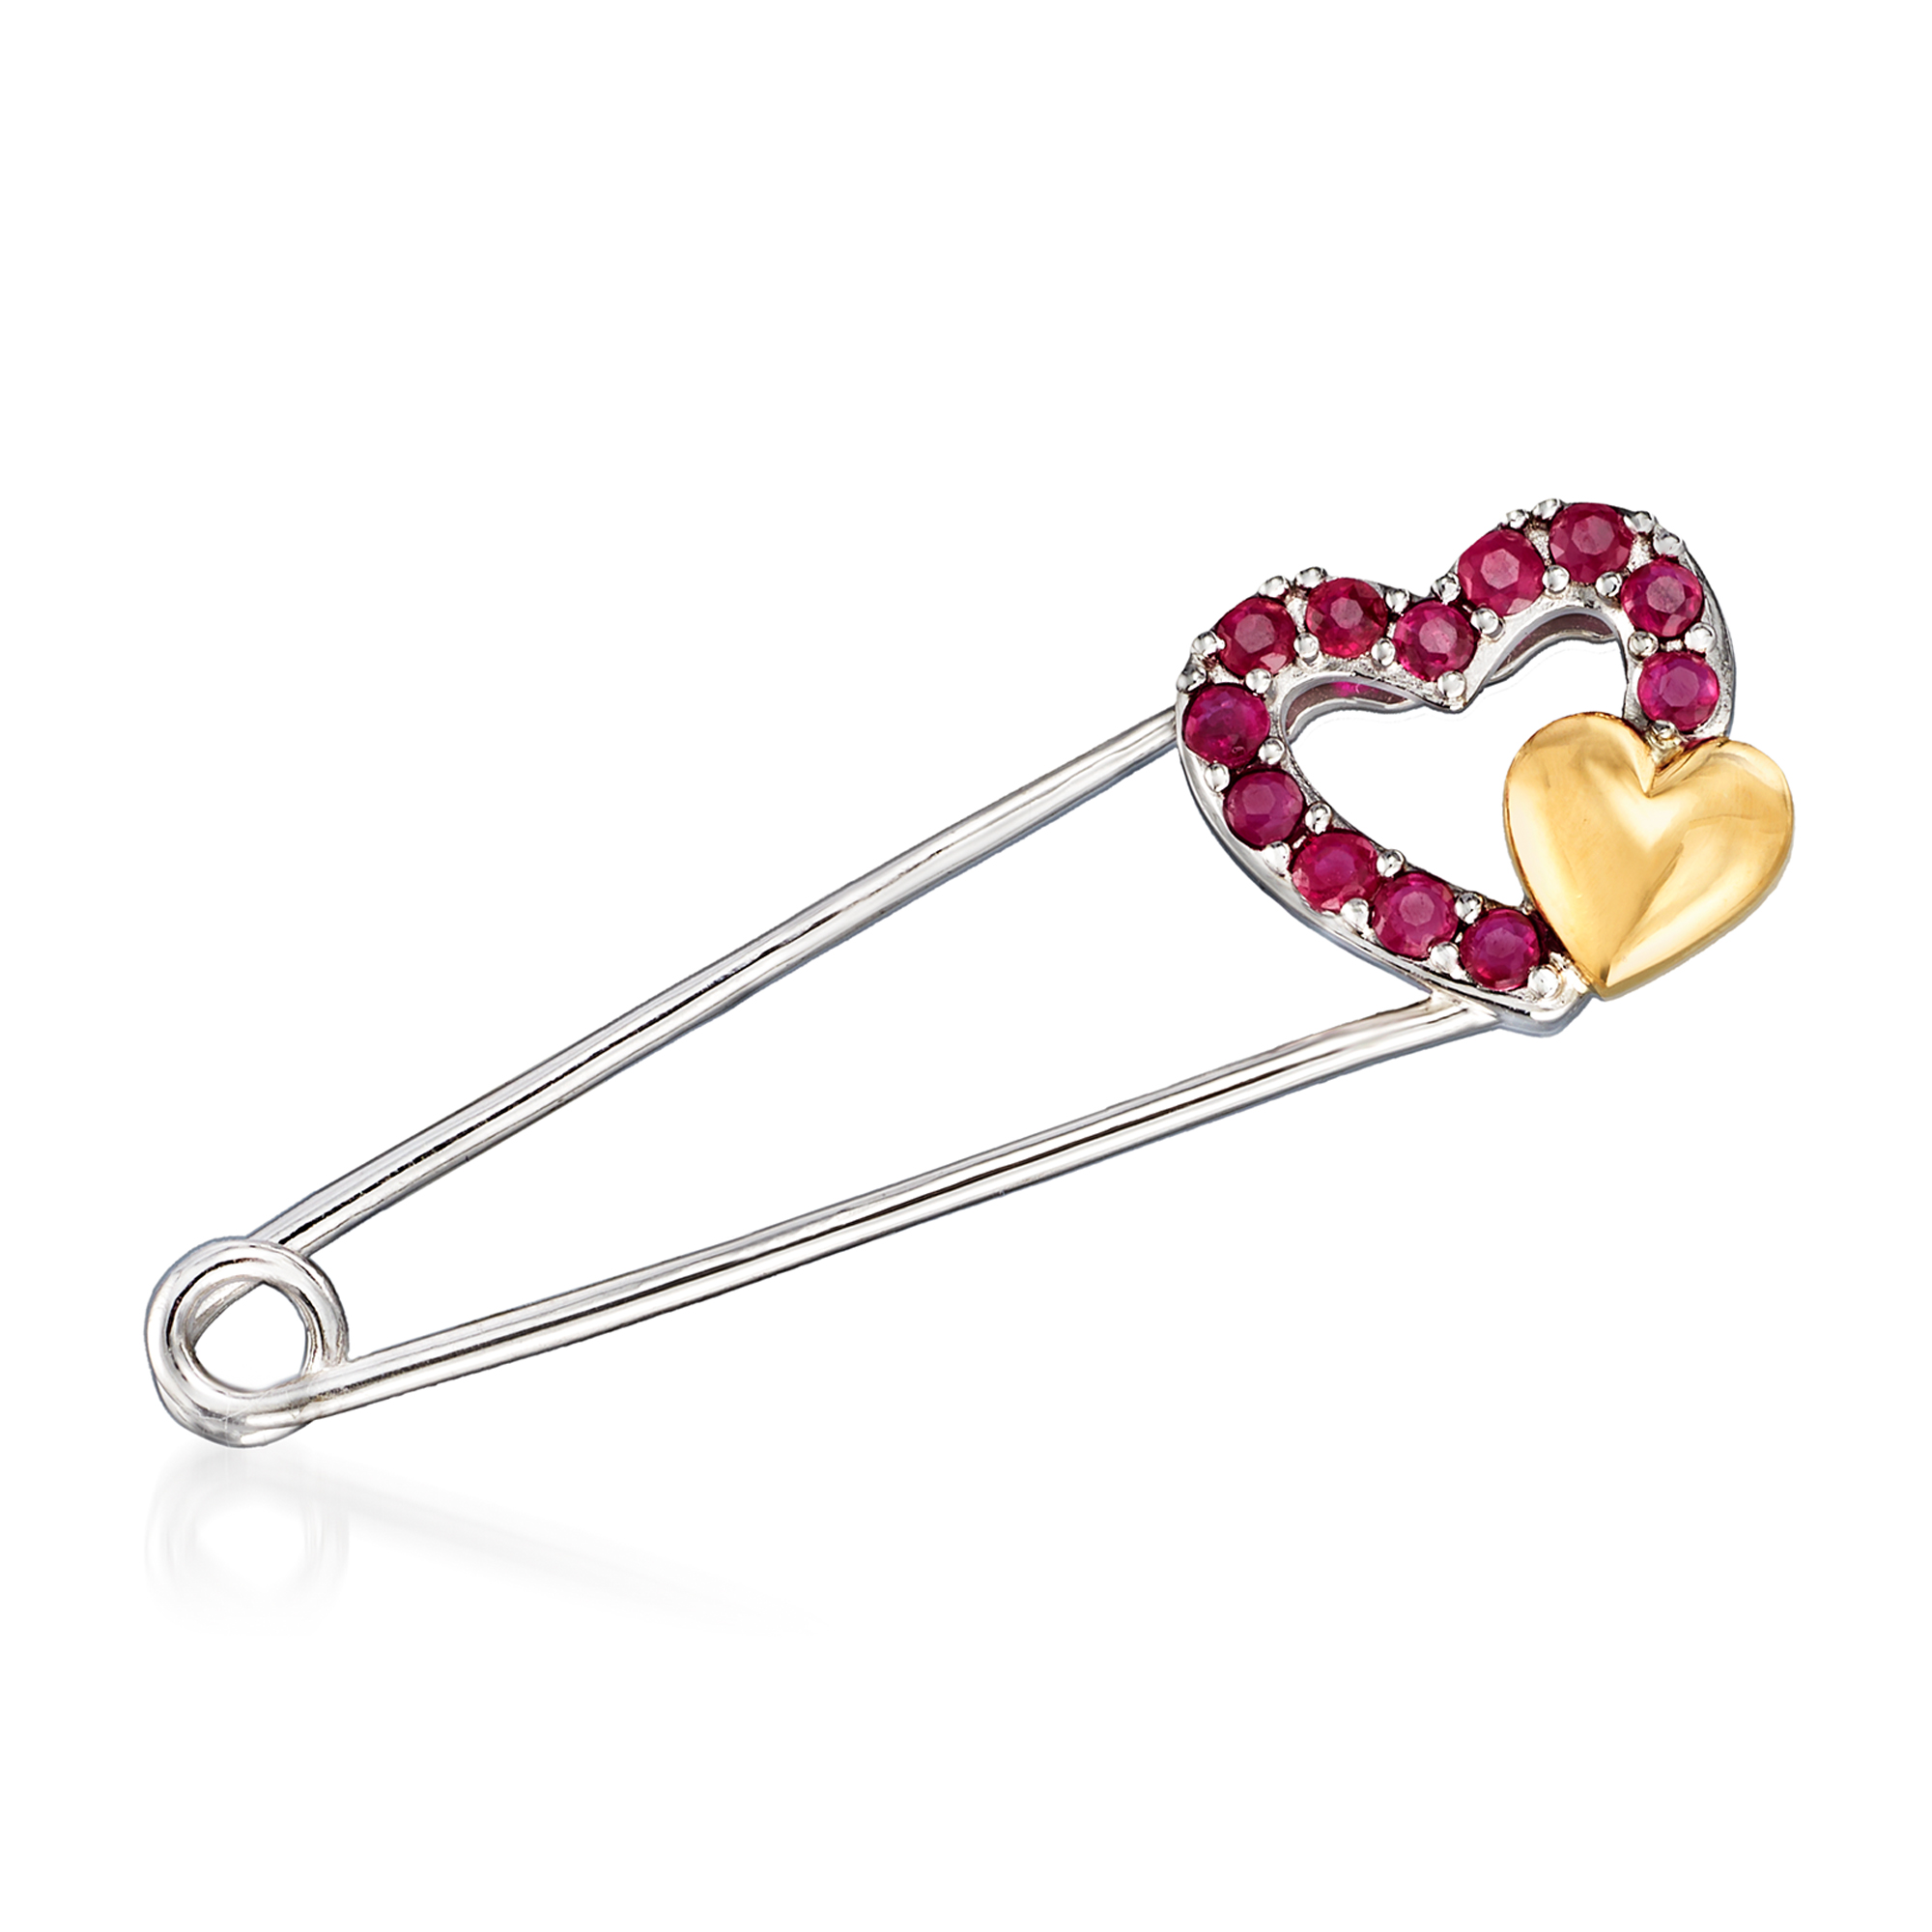 Ross-Simons - .16 CTW Diamond Safety Pin in Silver, 14kt Yellow Gold